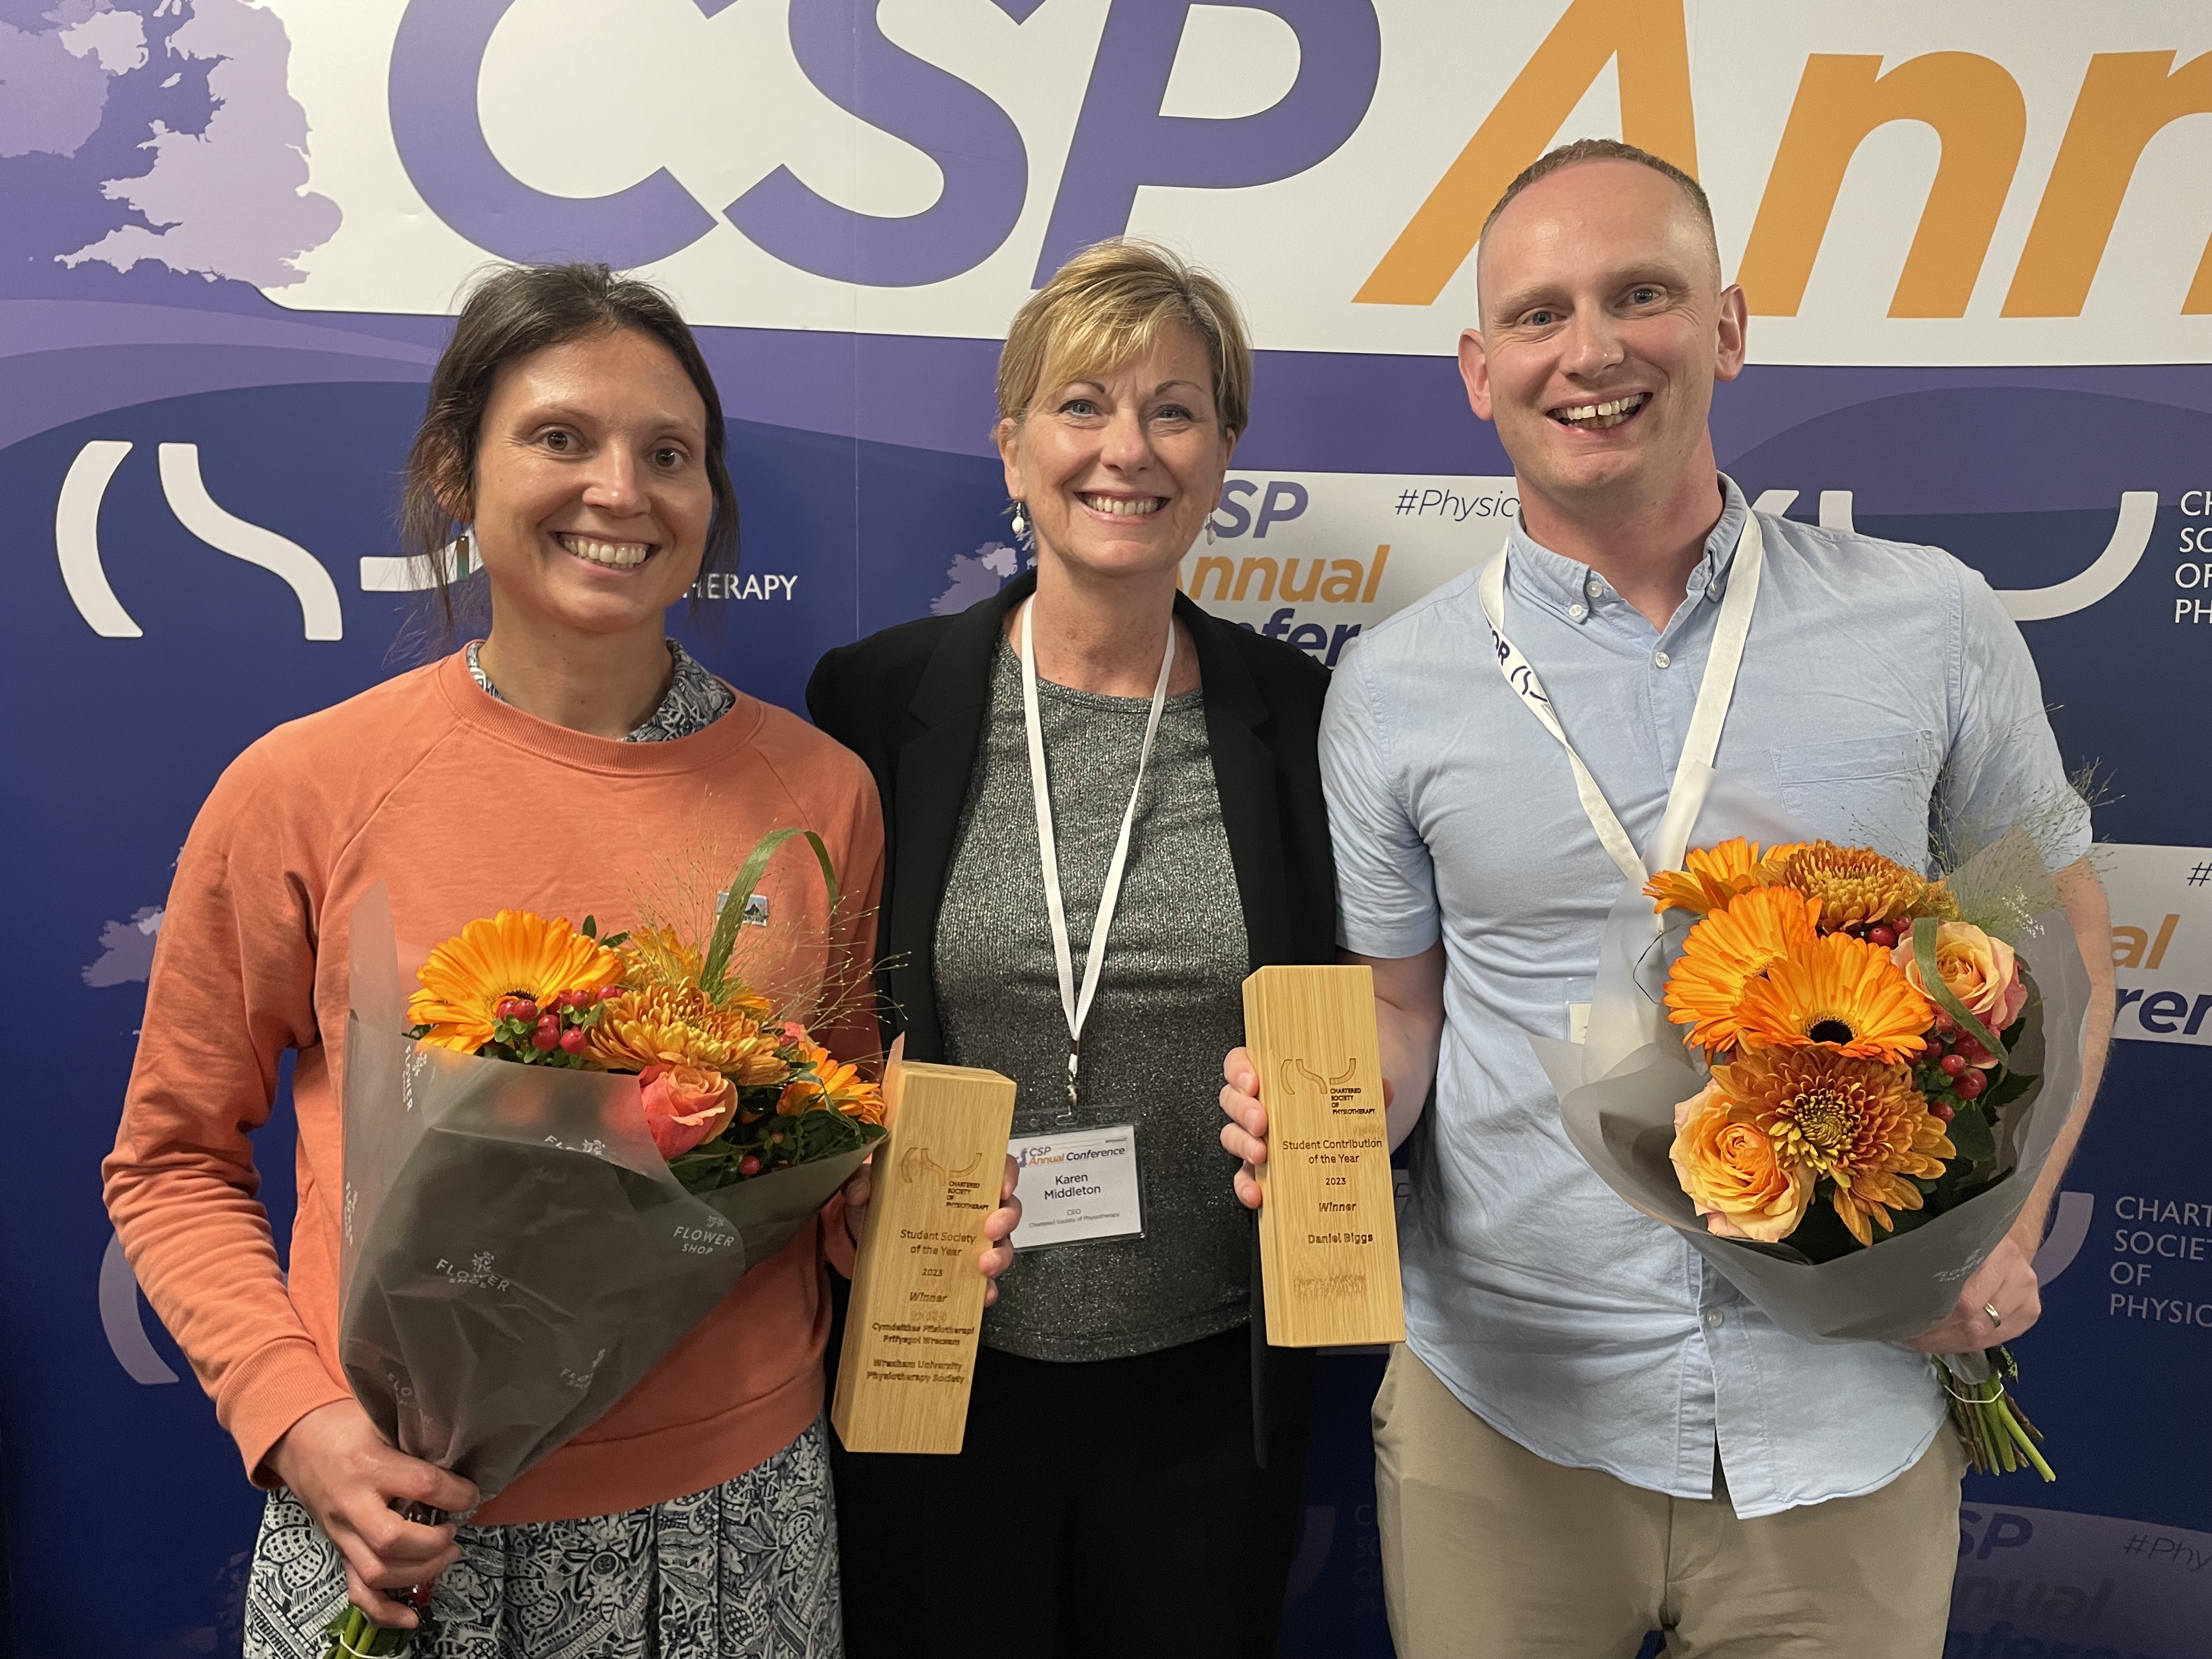 CSP student conference award winners